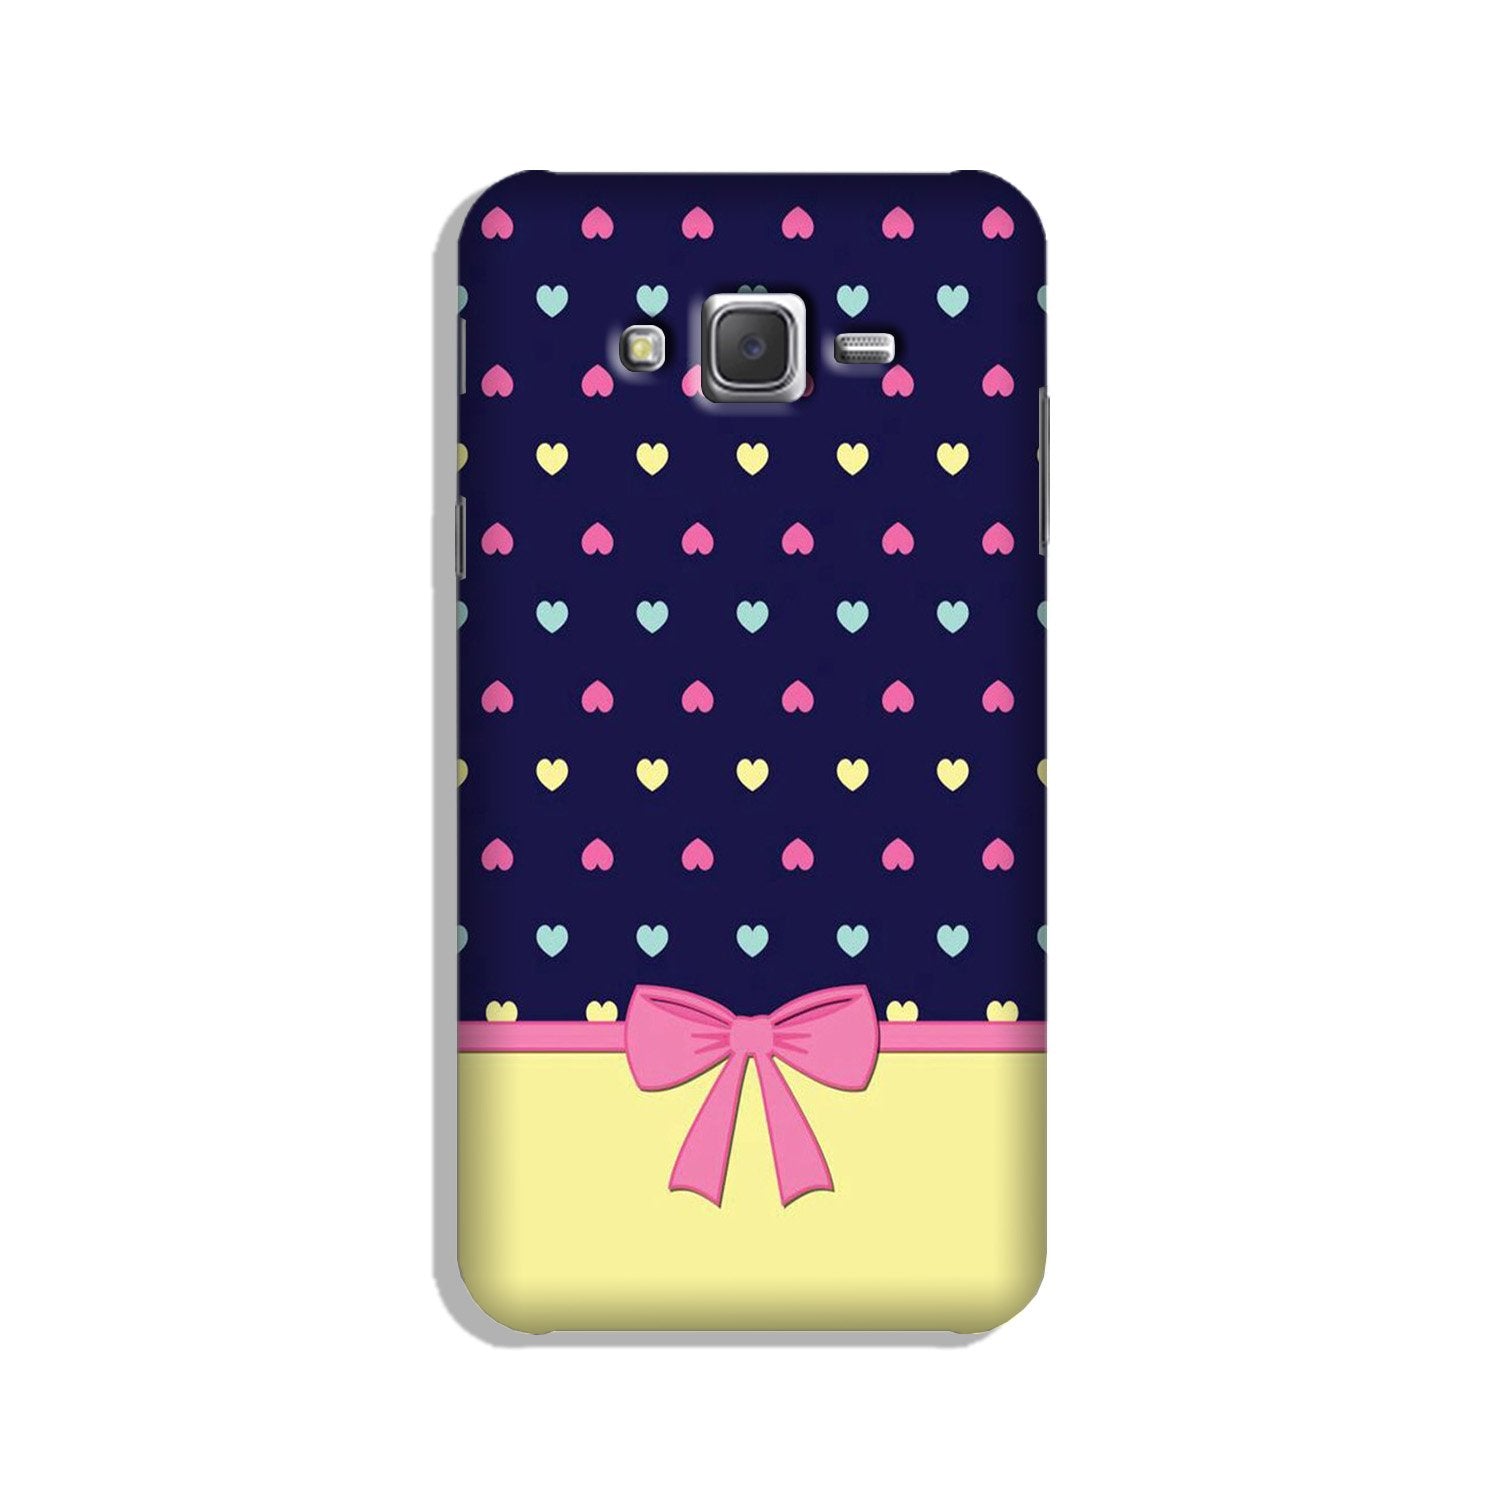 Gift Wrap5 Case for Galaxy J7 (2015)